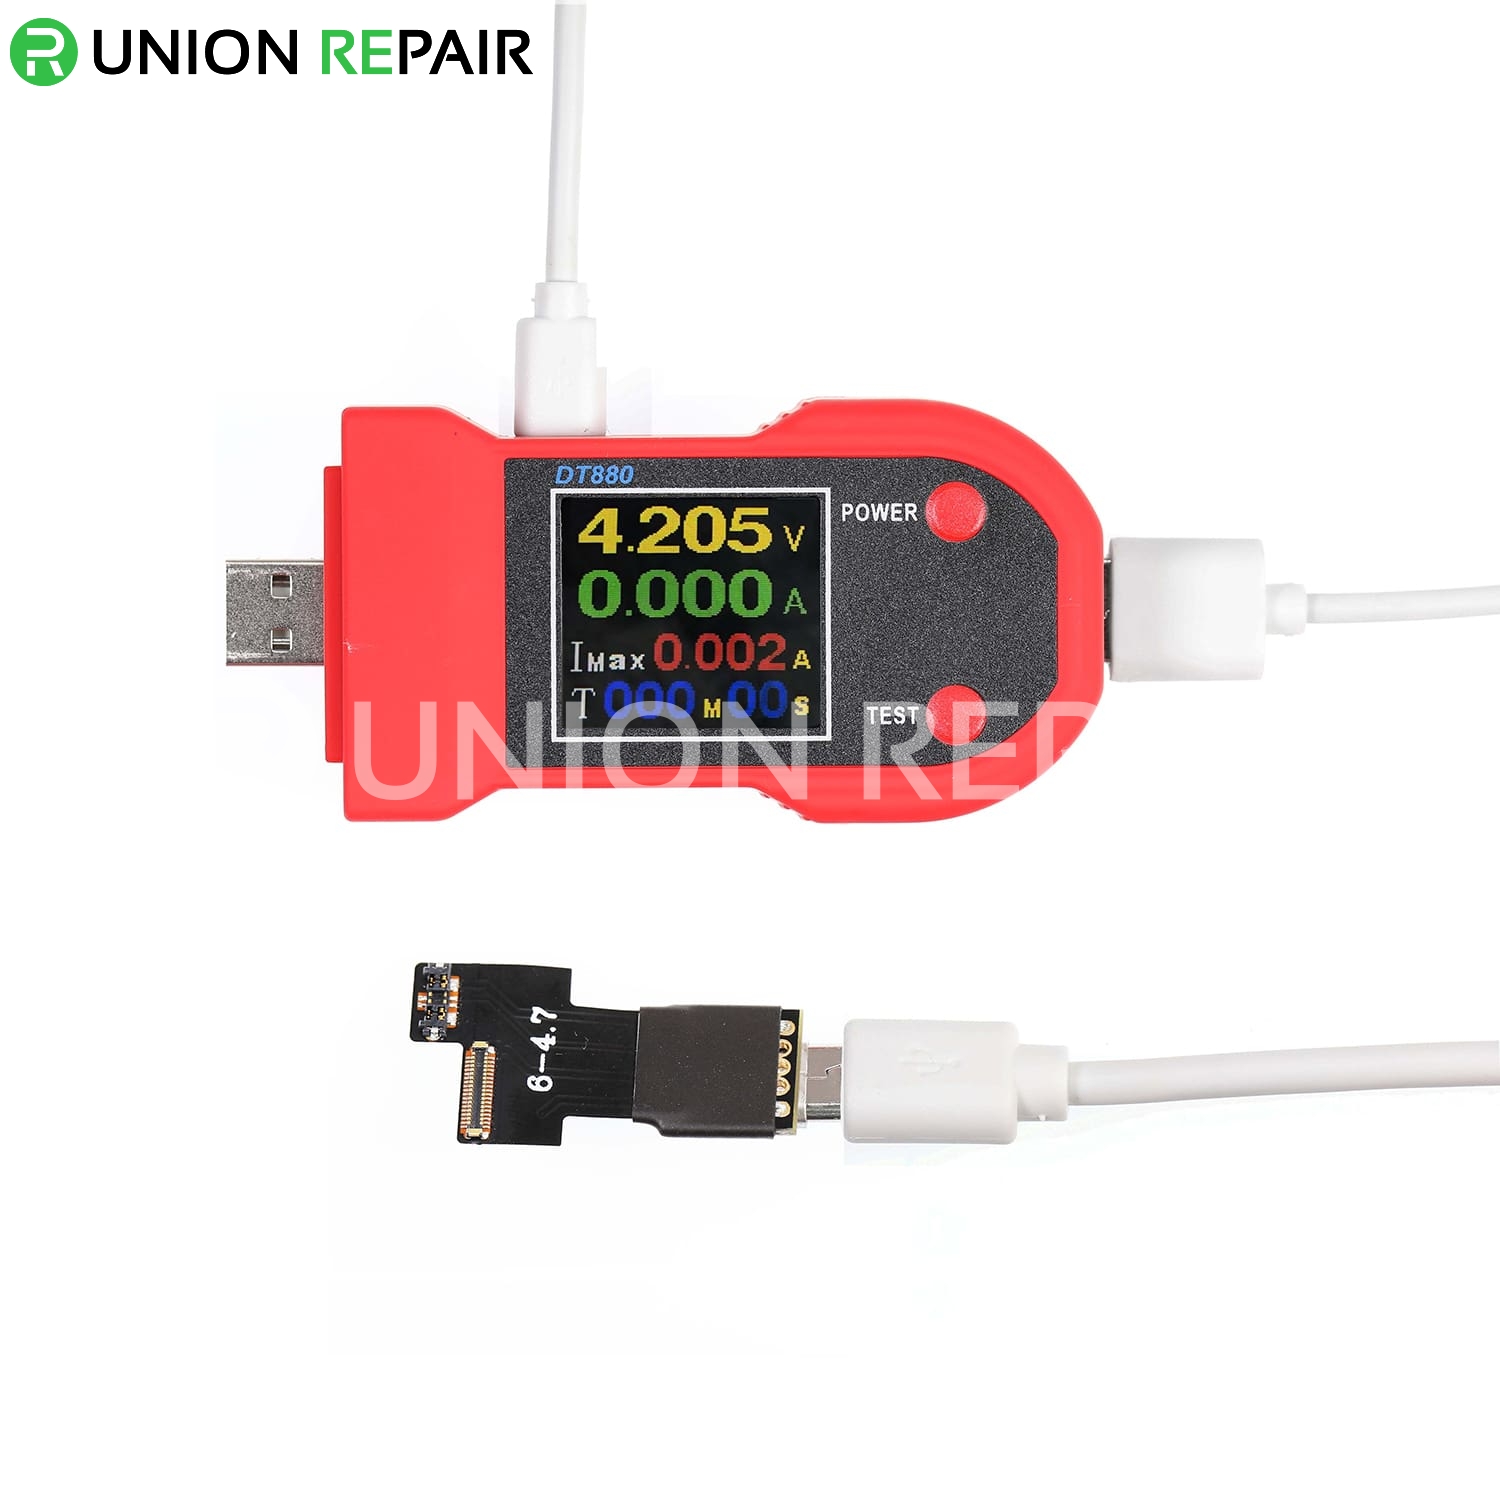 DT880 Mobile Phone Current Maintenance Tester for iPhone6-X